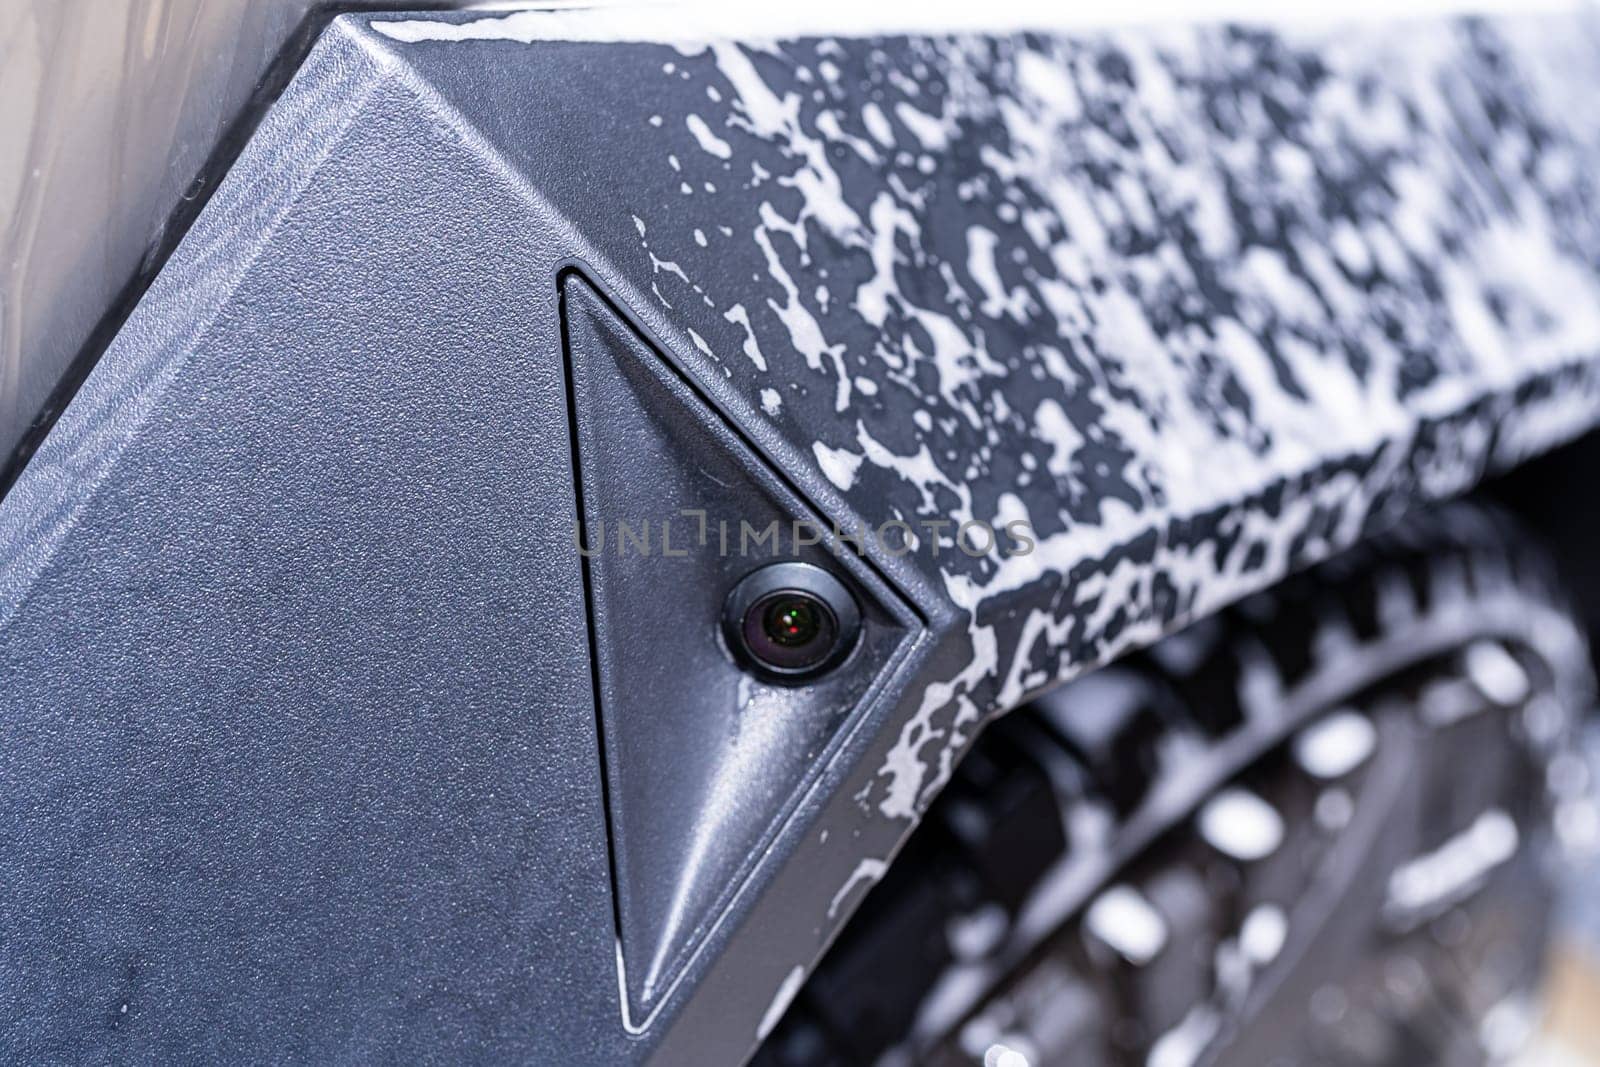 Denver, Colorado, USA-May 5, 2024-This image captures a close-up view of a side camera on the Tesla Cybertruck, covered in soap suds during a cleaning session, emphasizing the vehicle sleek design and modern features.